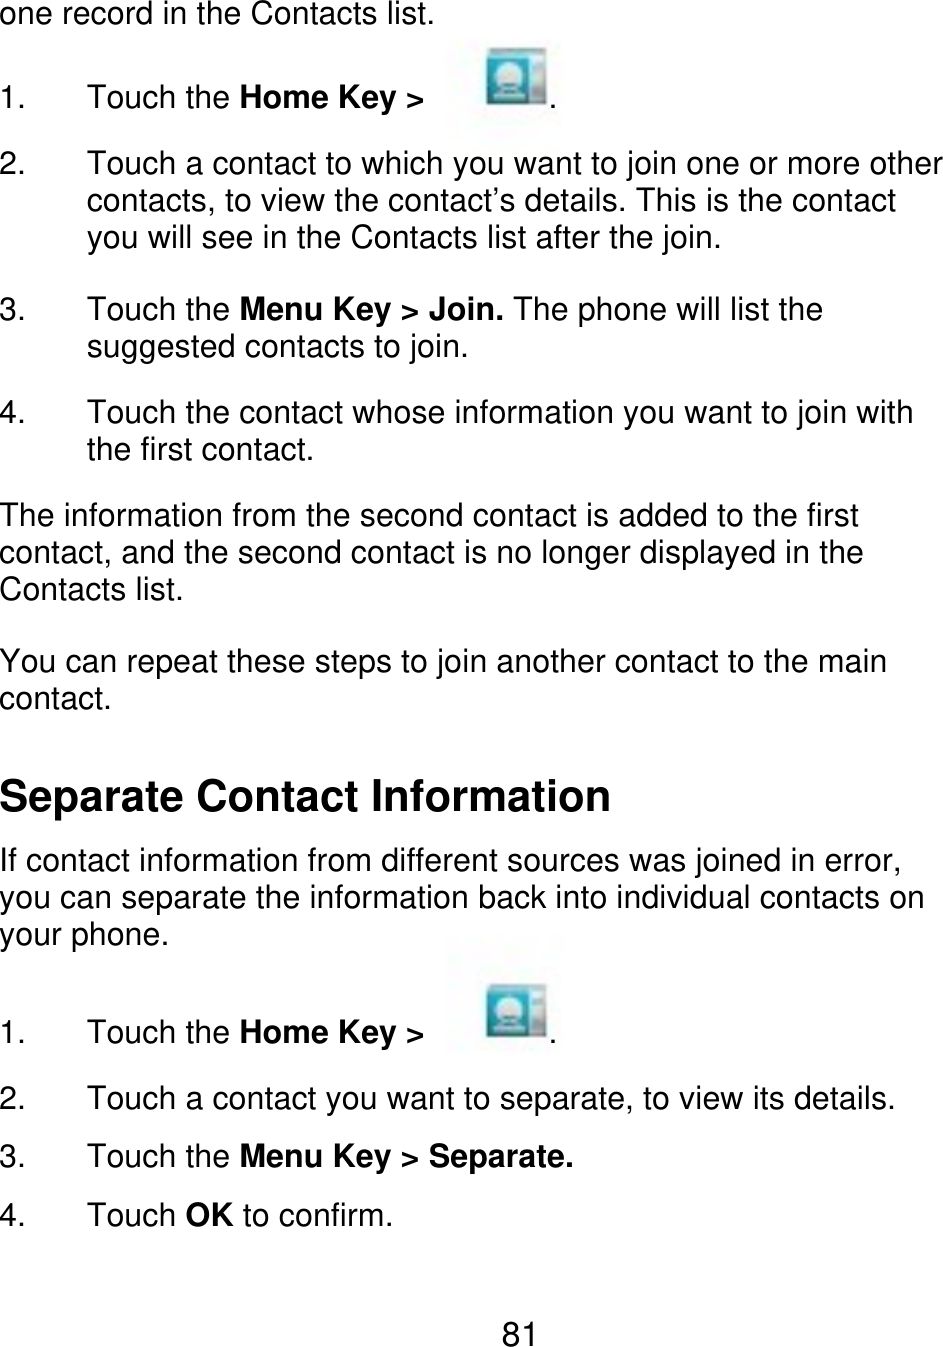 one record in the Contacts list. 1. 2. Touch the Home Key &gt; . Touch a contact to which you want to join one or more other contacts, to view the contact’s details. This is the contact you will see in the Contacts list after the join. Touch the Menu Key &gt; Join. The phone will list the suggested contacts to join. Touch the contact whose information you want to join with the first contact. 3. 4. The information from the second contact is added to the first contact, and the second contact is no longer displayed in the Contacts list. You can repeat these steps to join another contact to the main contact. Separate Contact Information If contact information from different sources was joined in error, you can separate the information back into individual contacts on your phone. 1. 2. 3. 4. Touch the Home Key &gt; . Touch a contact you want to separate, to view its details. Touch the Menu Key &gt; Separate. Touch OK to confirm. 81 